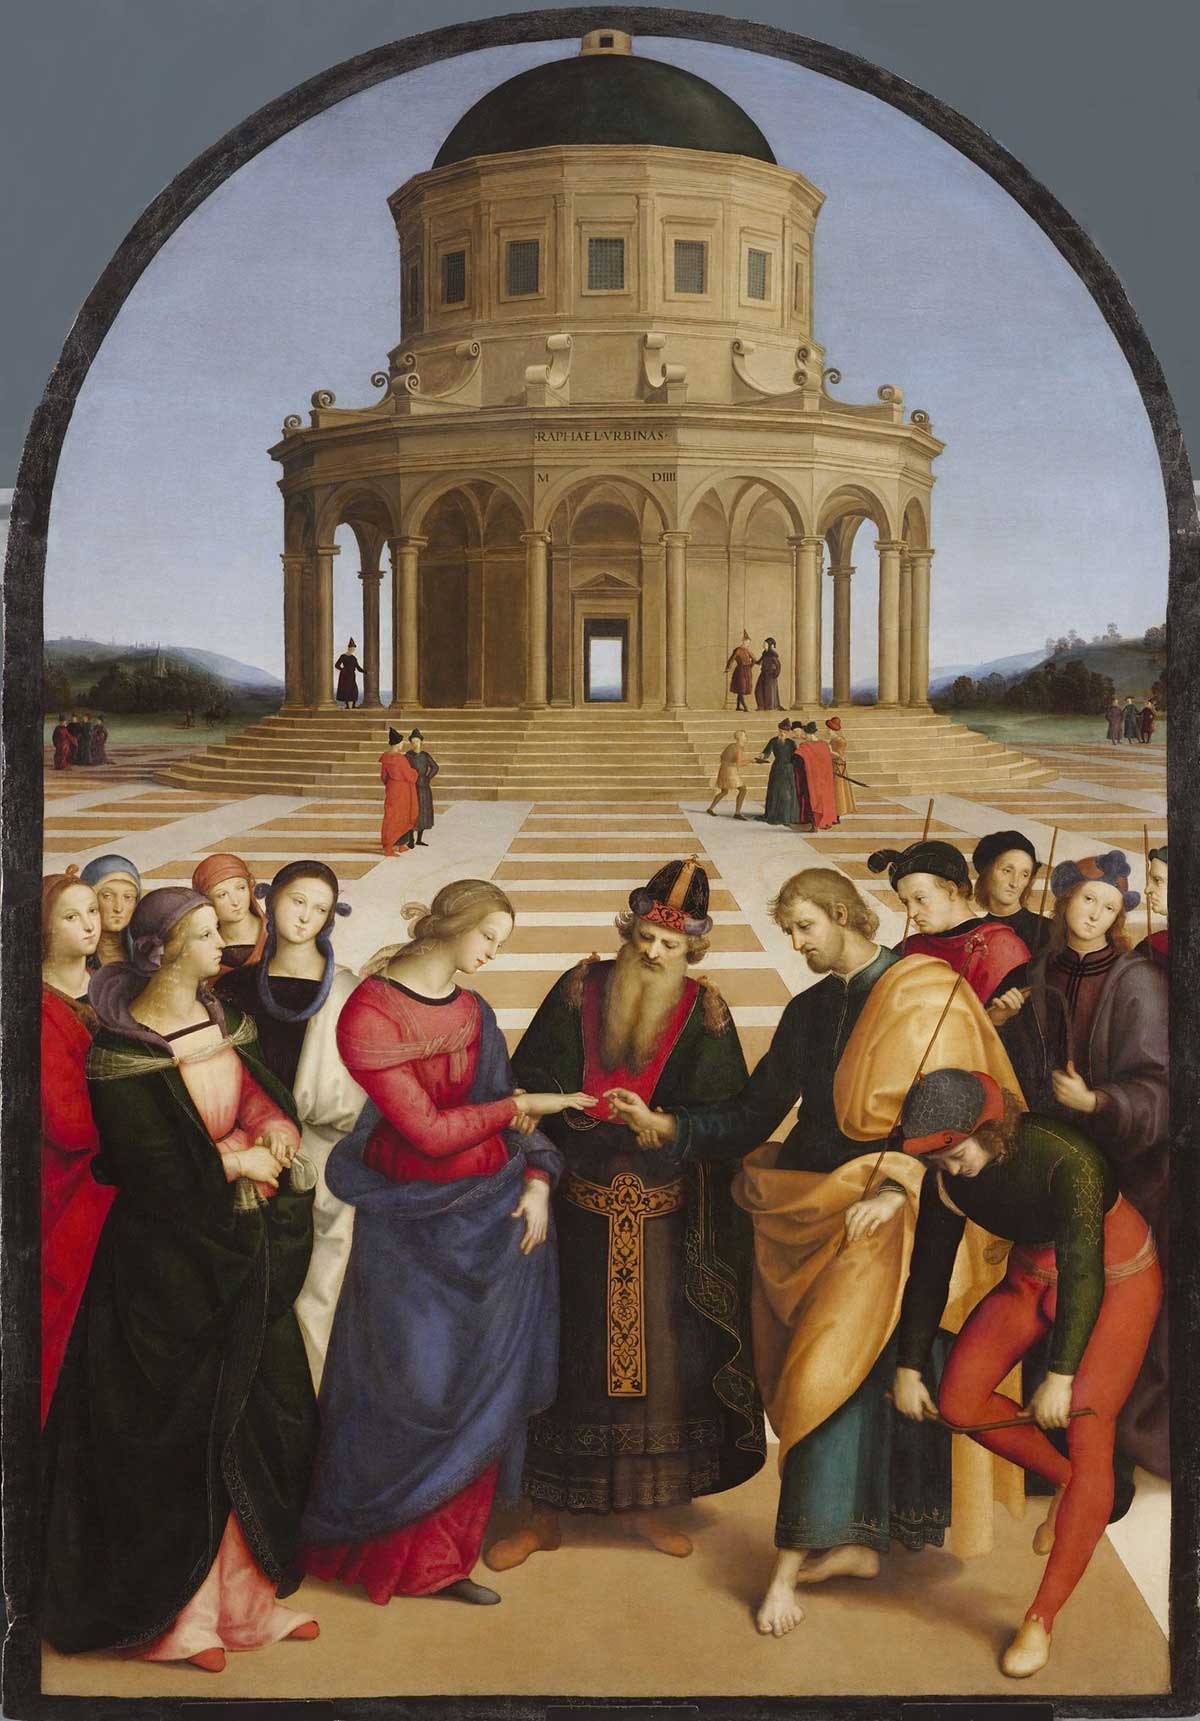 Raphael’s Marriage of the Virgin